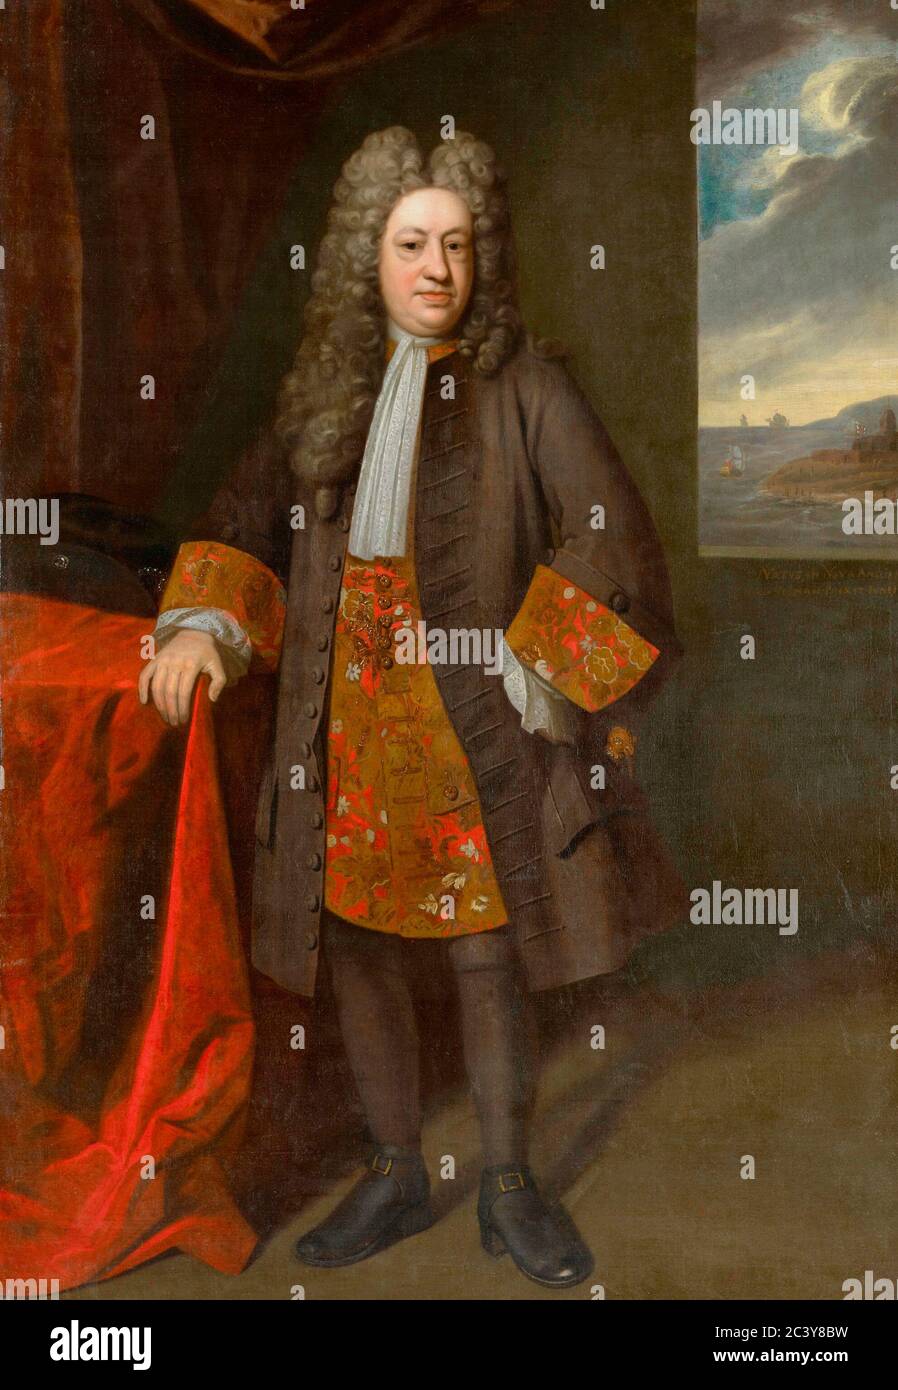 Elihu Yale, British merchant and slave trader and benefactor of the Collegiate School of Connecticut, renamed Yale College in his honor. By Enoch Seeman the younger 1717. Stock Photo